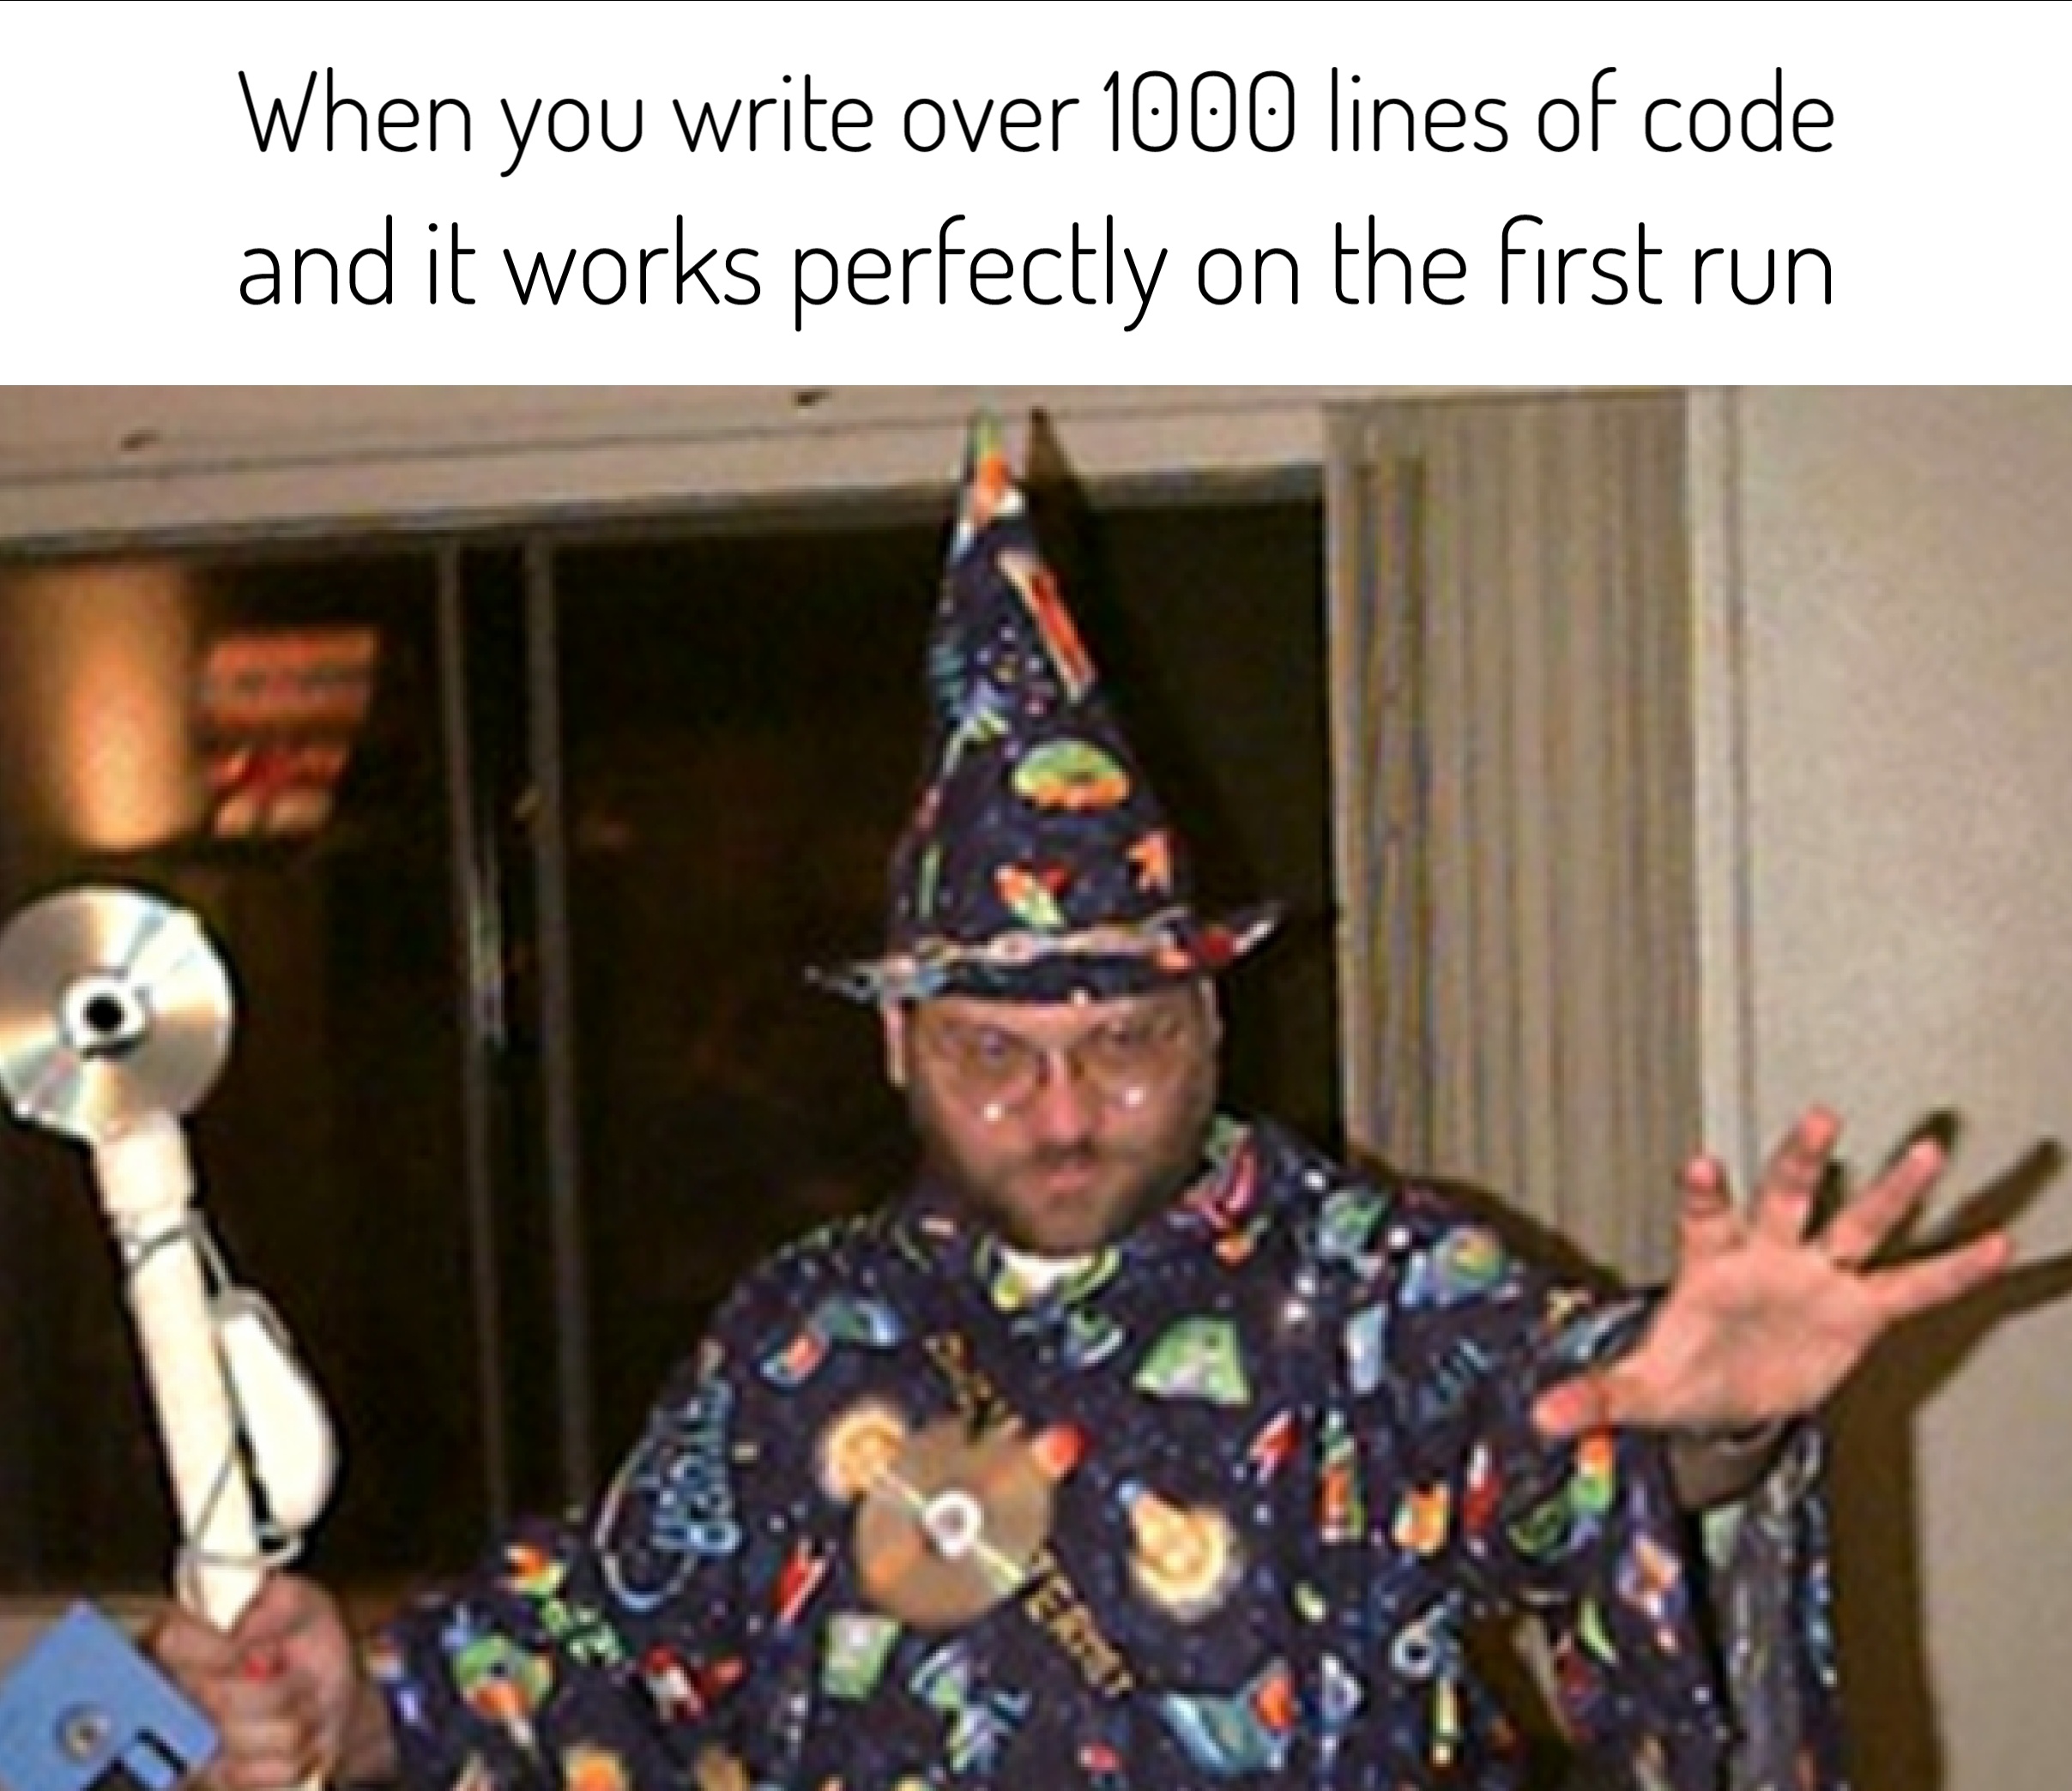 installation wizard cosplay - When you write over 1000 lines of code and it works perfectly on the first run 10 Sa